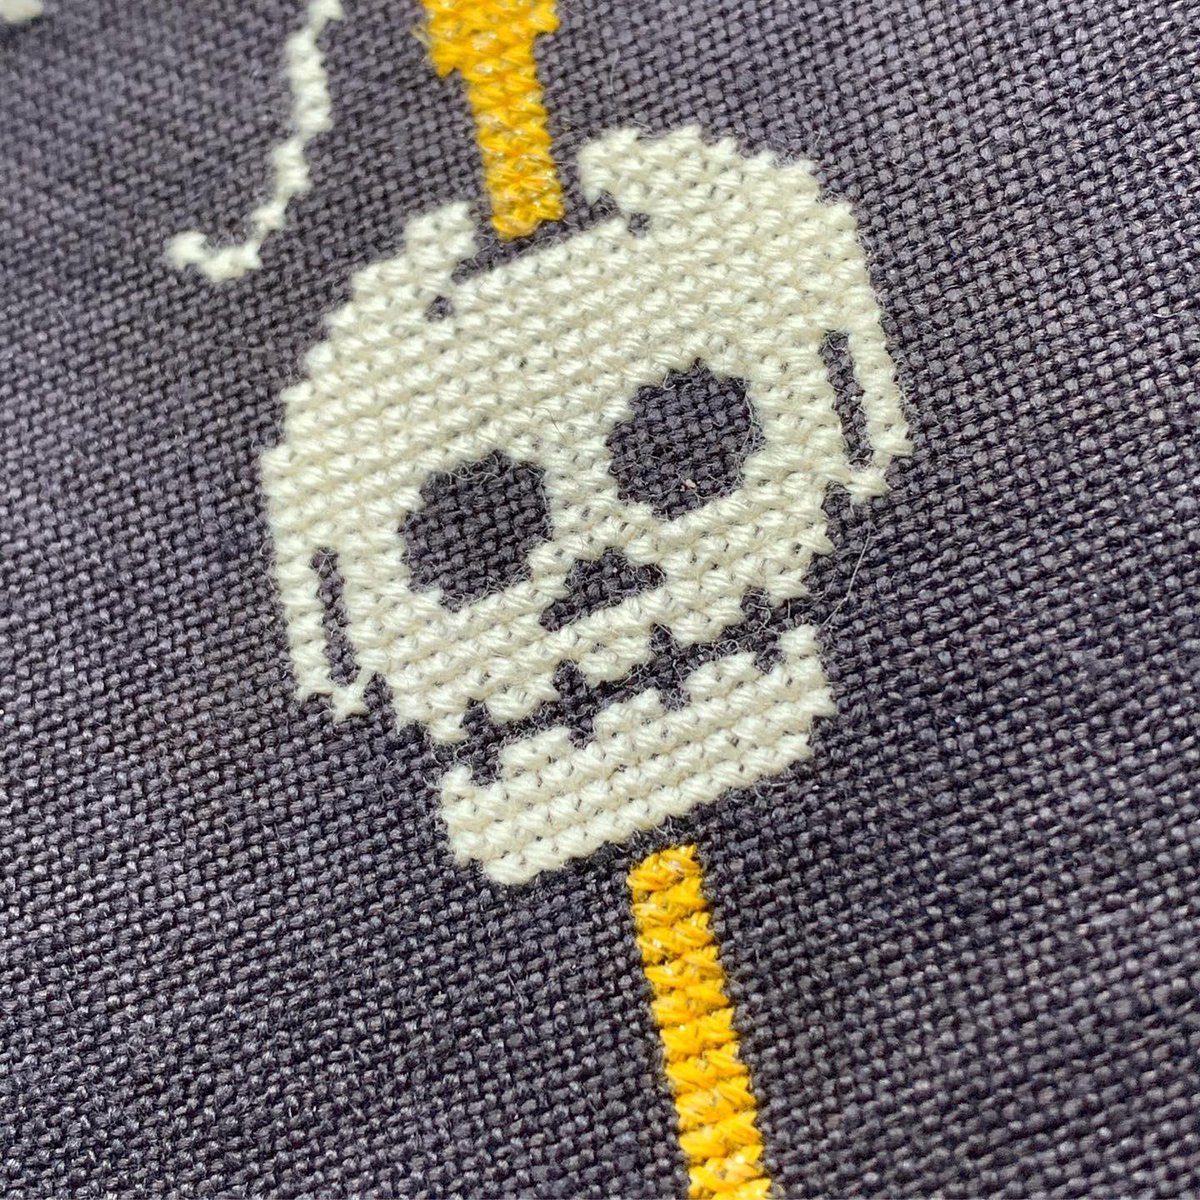 Are you ready for a stitching coffin set? ⚰️ Needle stitch with DMC Étoile ✨

#crossstitch #crossstitching #DMCEtoile